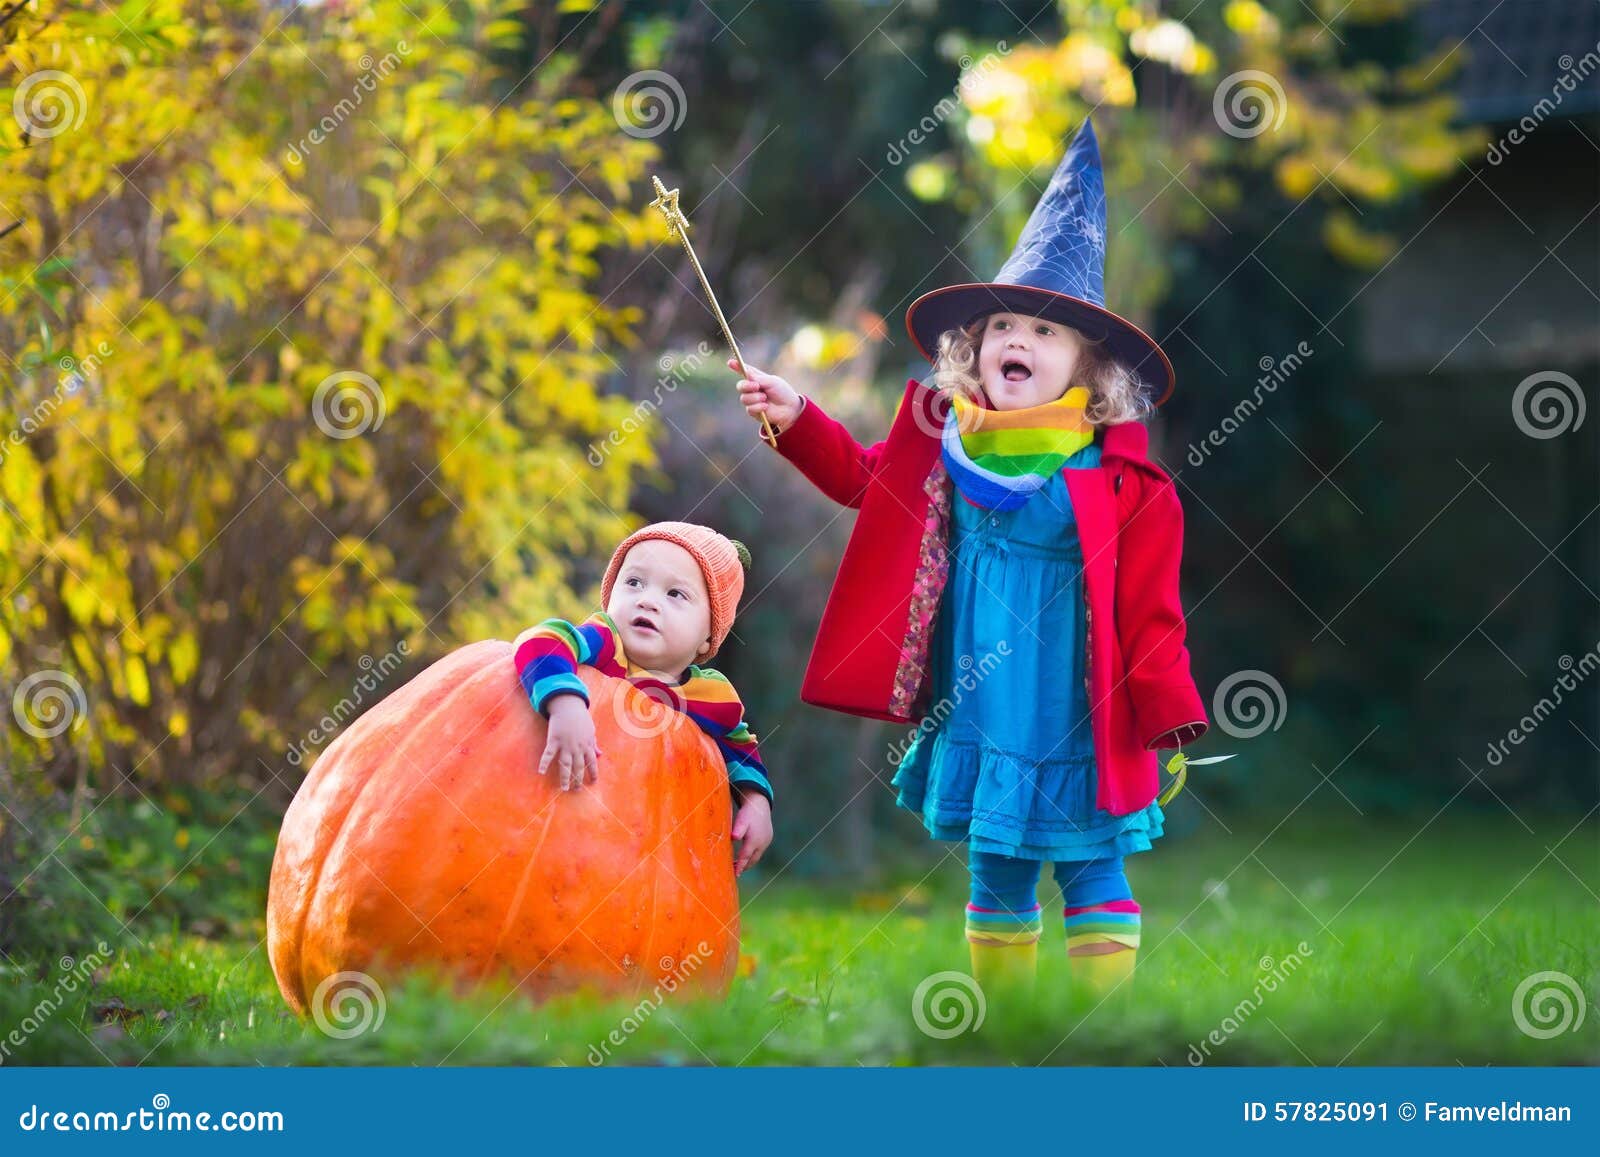 Kids Trick or Treating at Halloween Stock Image - Image of fall, inside ...